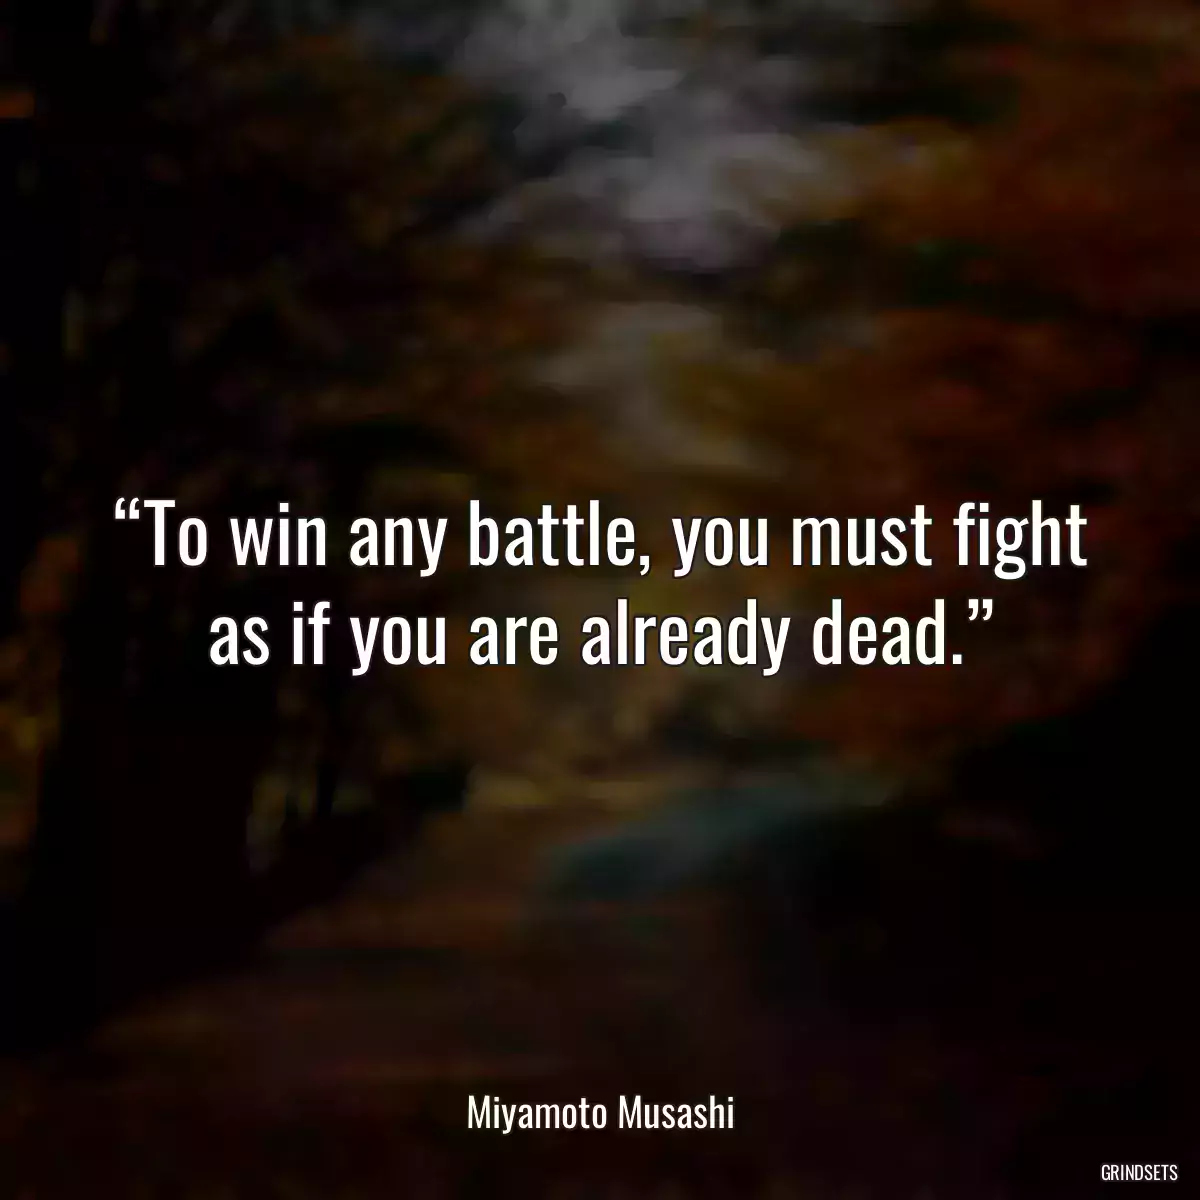 “To win any battle, you must fight as if you are already dead.”